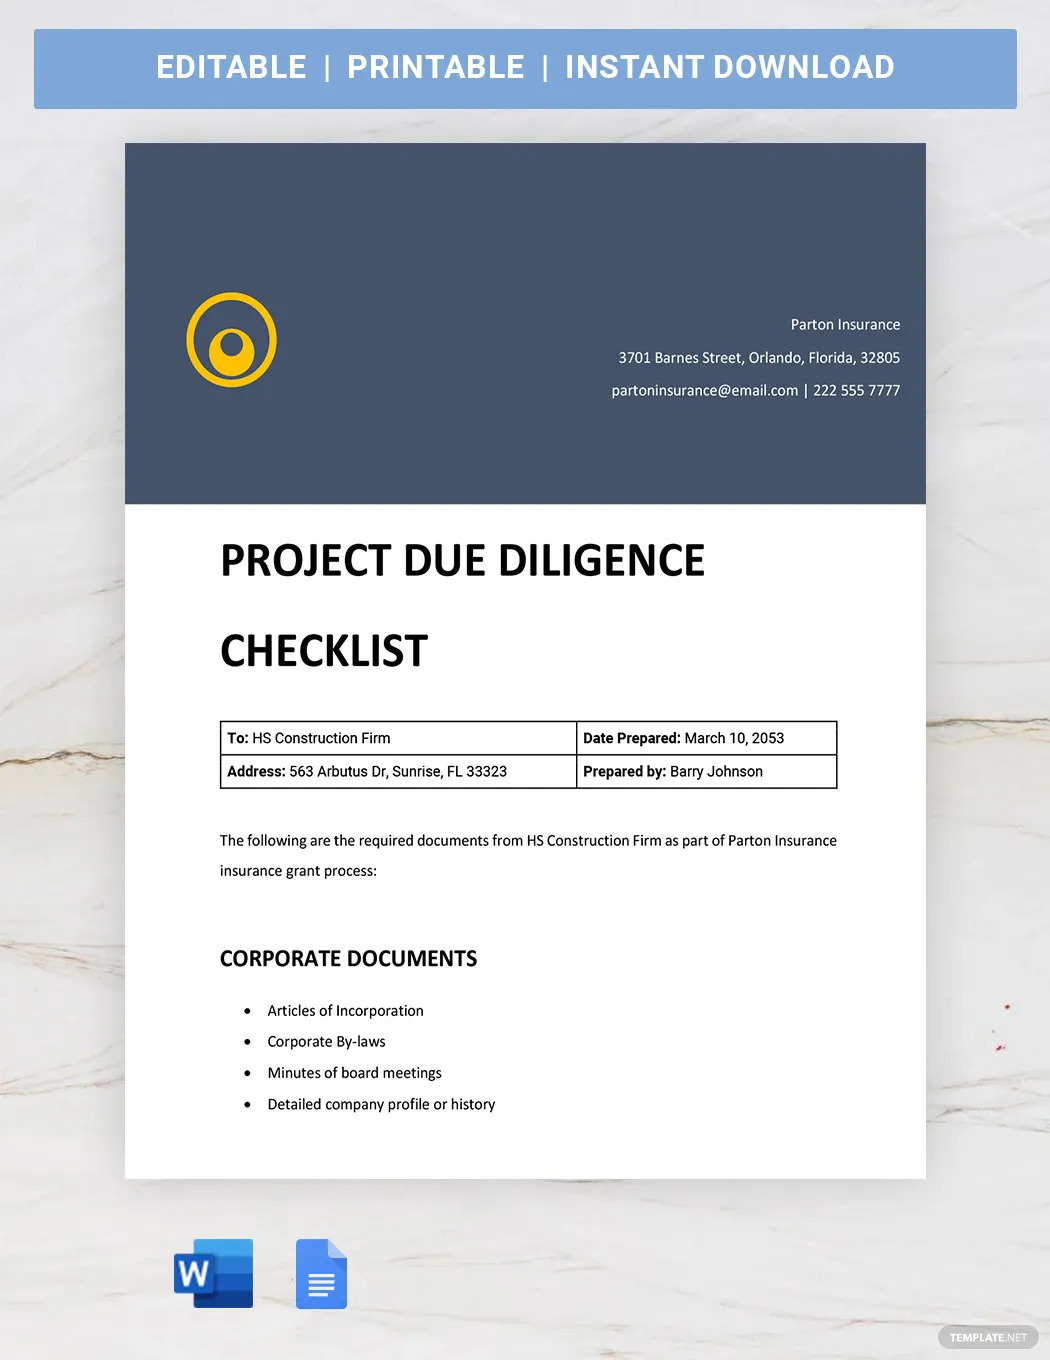 project due diligence ideas and examples